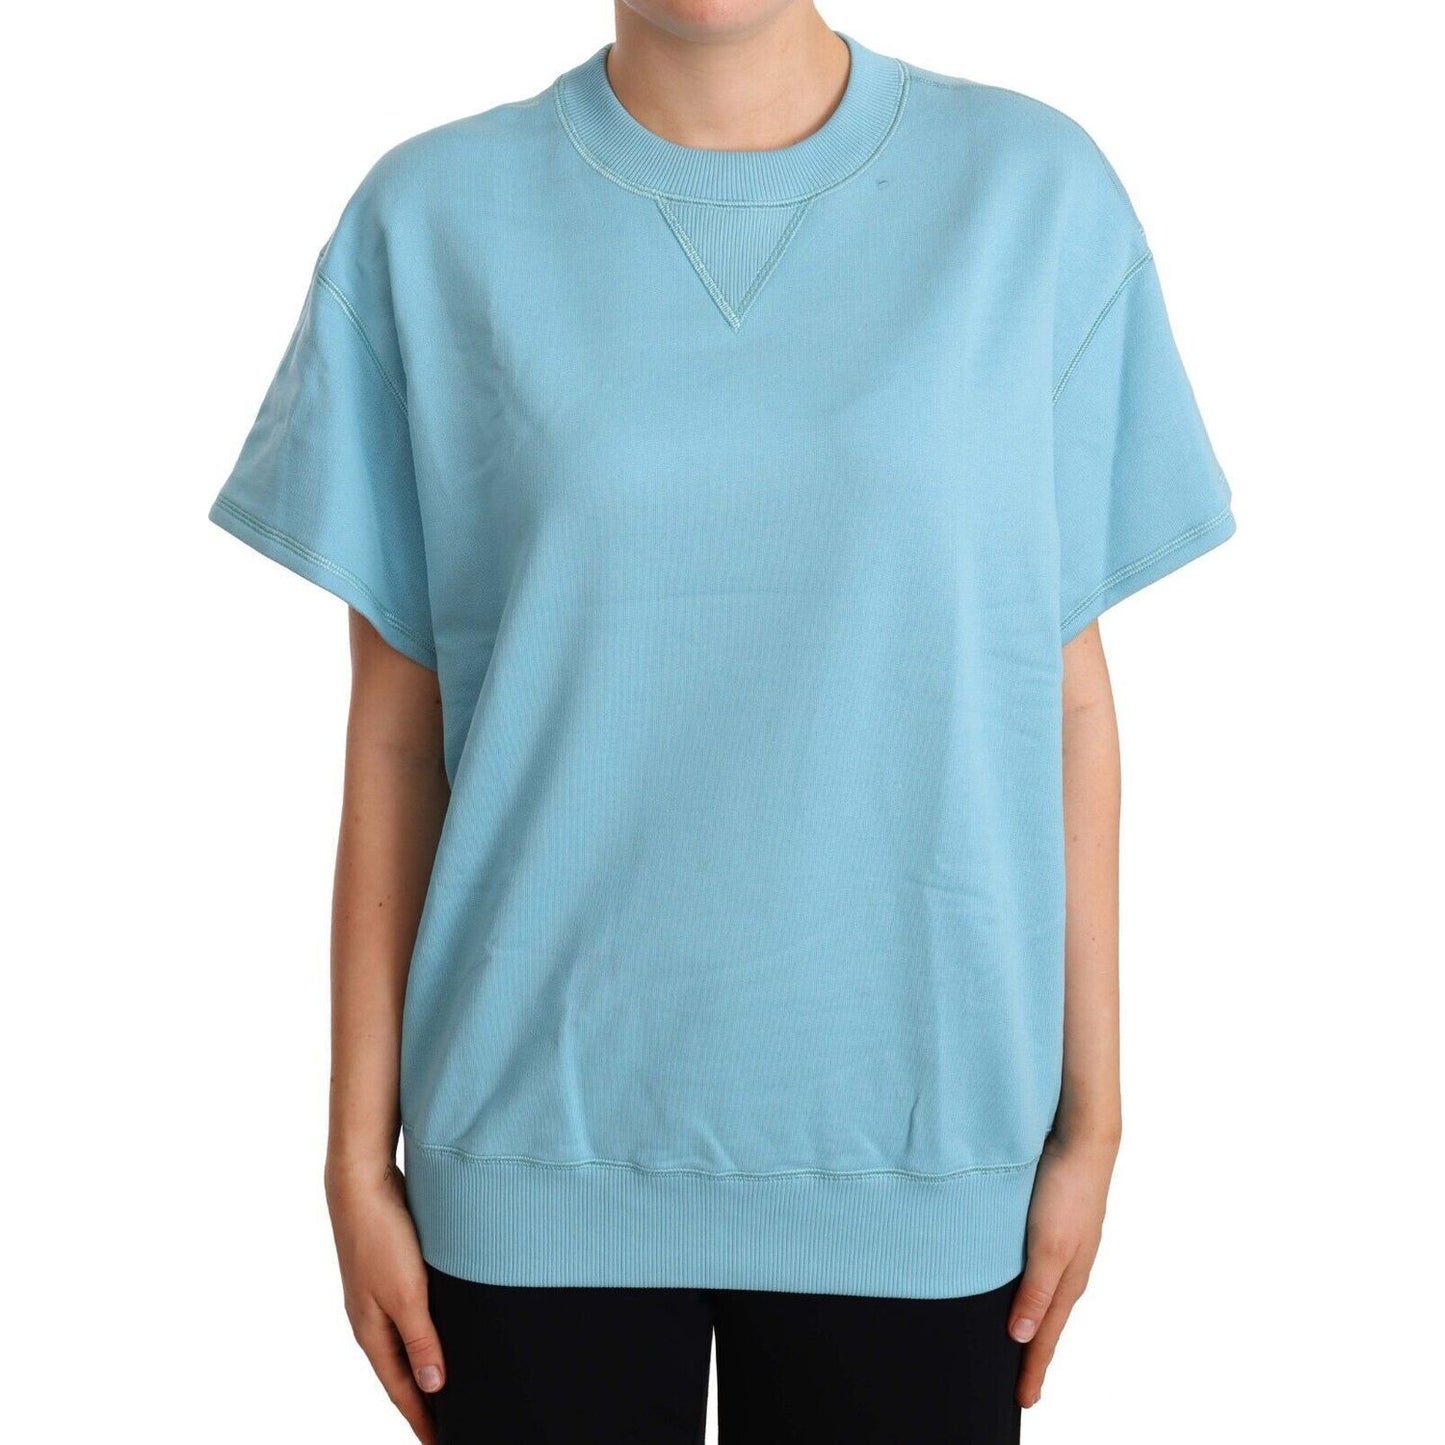 Dolce & Gabbana Elegant Blue Crew Neck Cotton Top WOMAN TOPS AND SHIRTS blue-cotton-short-sleeves-crew-neck-top s-l1600-2022-09-16T114011.904-2bd0783a-0aa.jpg